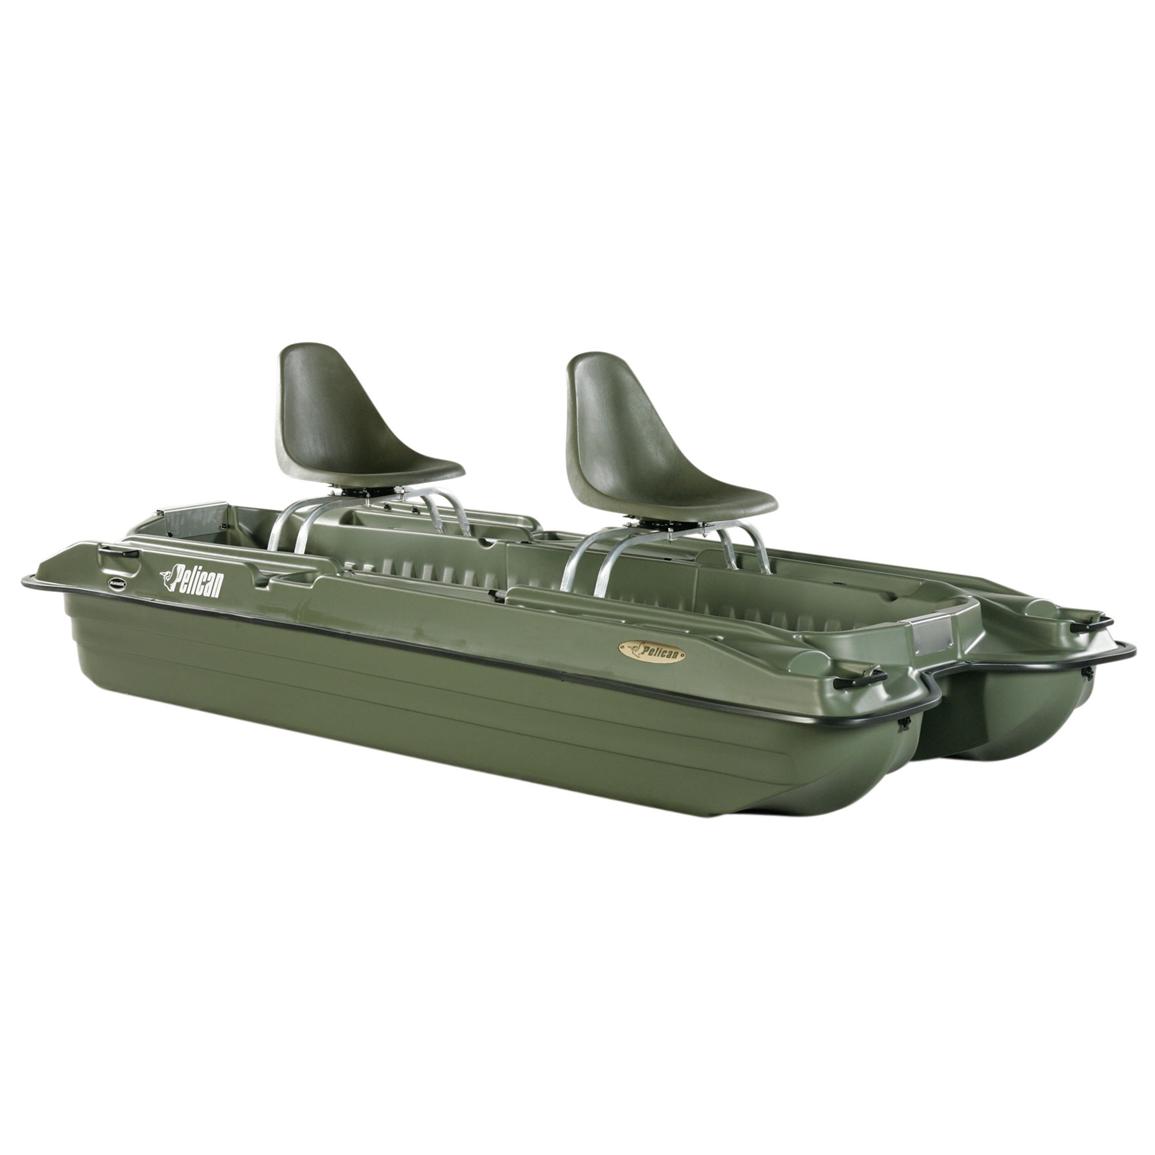 Pelican® Bass Raider 10™ Bass Boat - 124713, Boats at Sportsman's Guide1155 x 1155